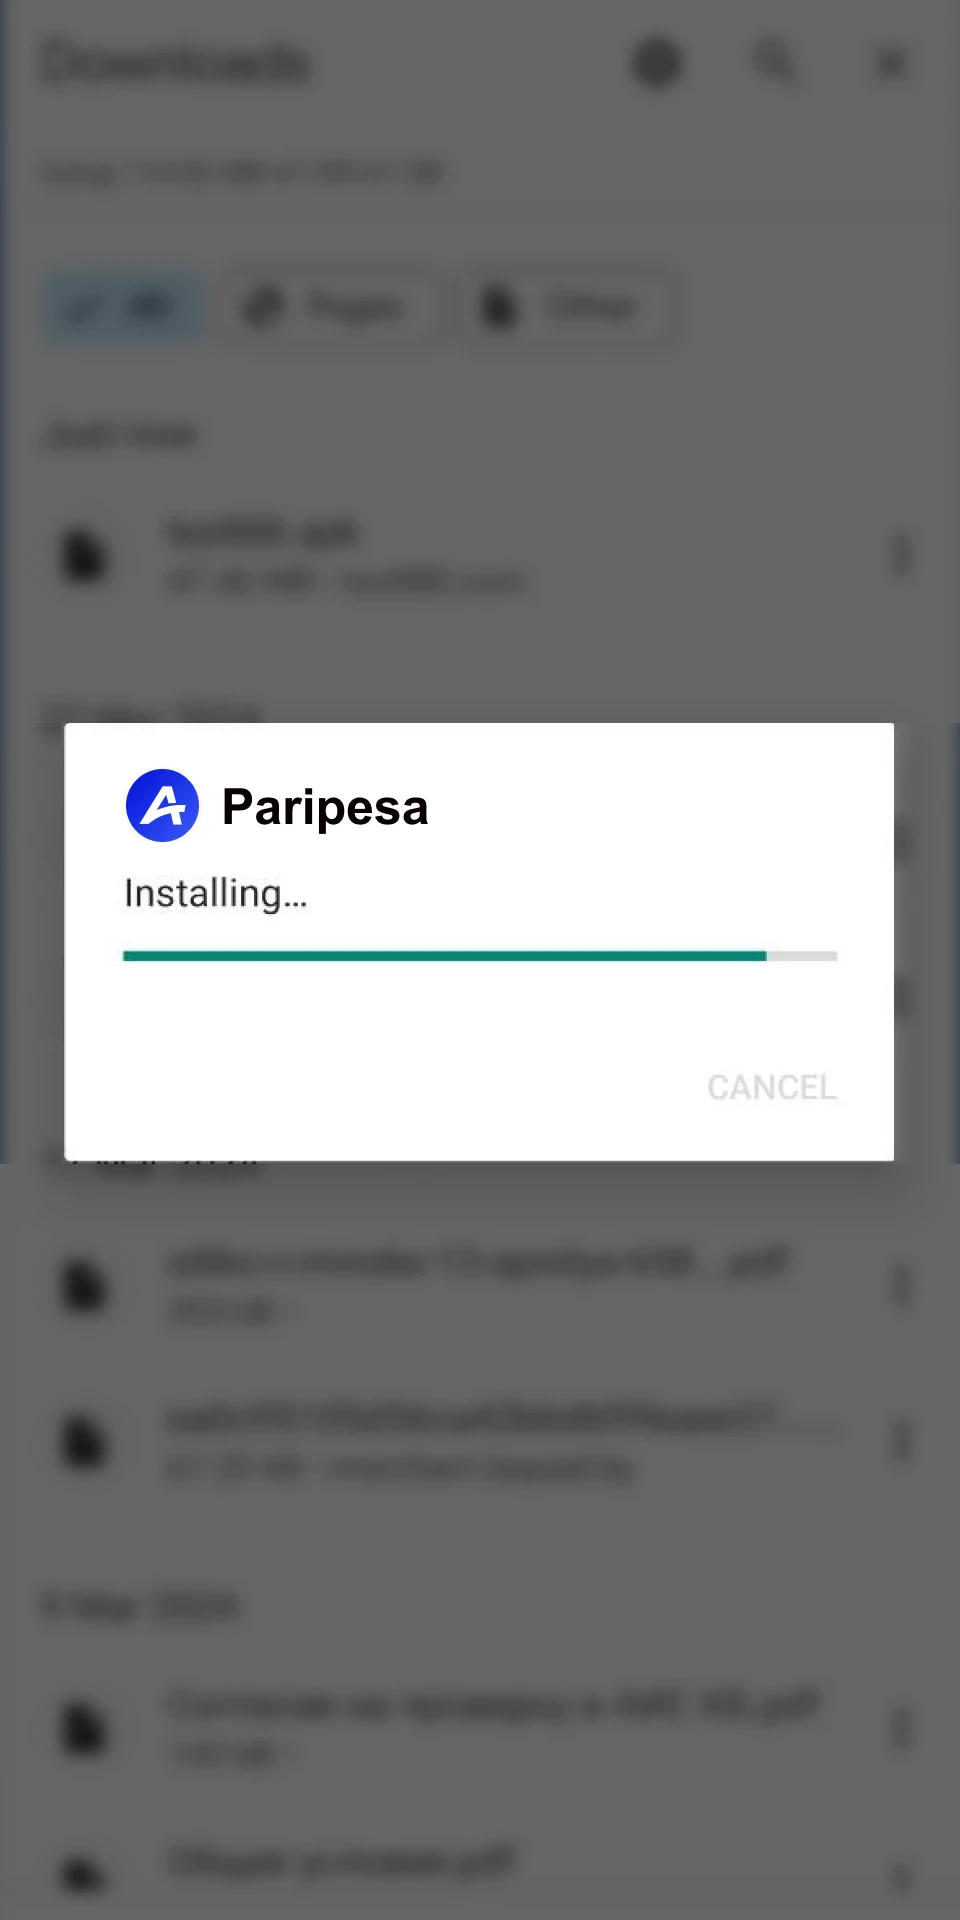 The Paripesa app installs quickly and easily on Android devices.